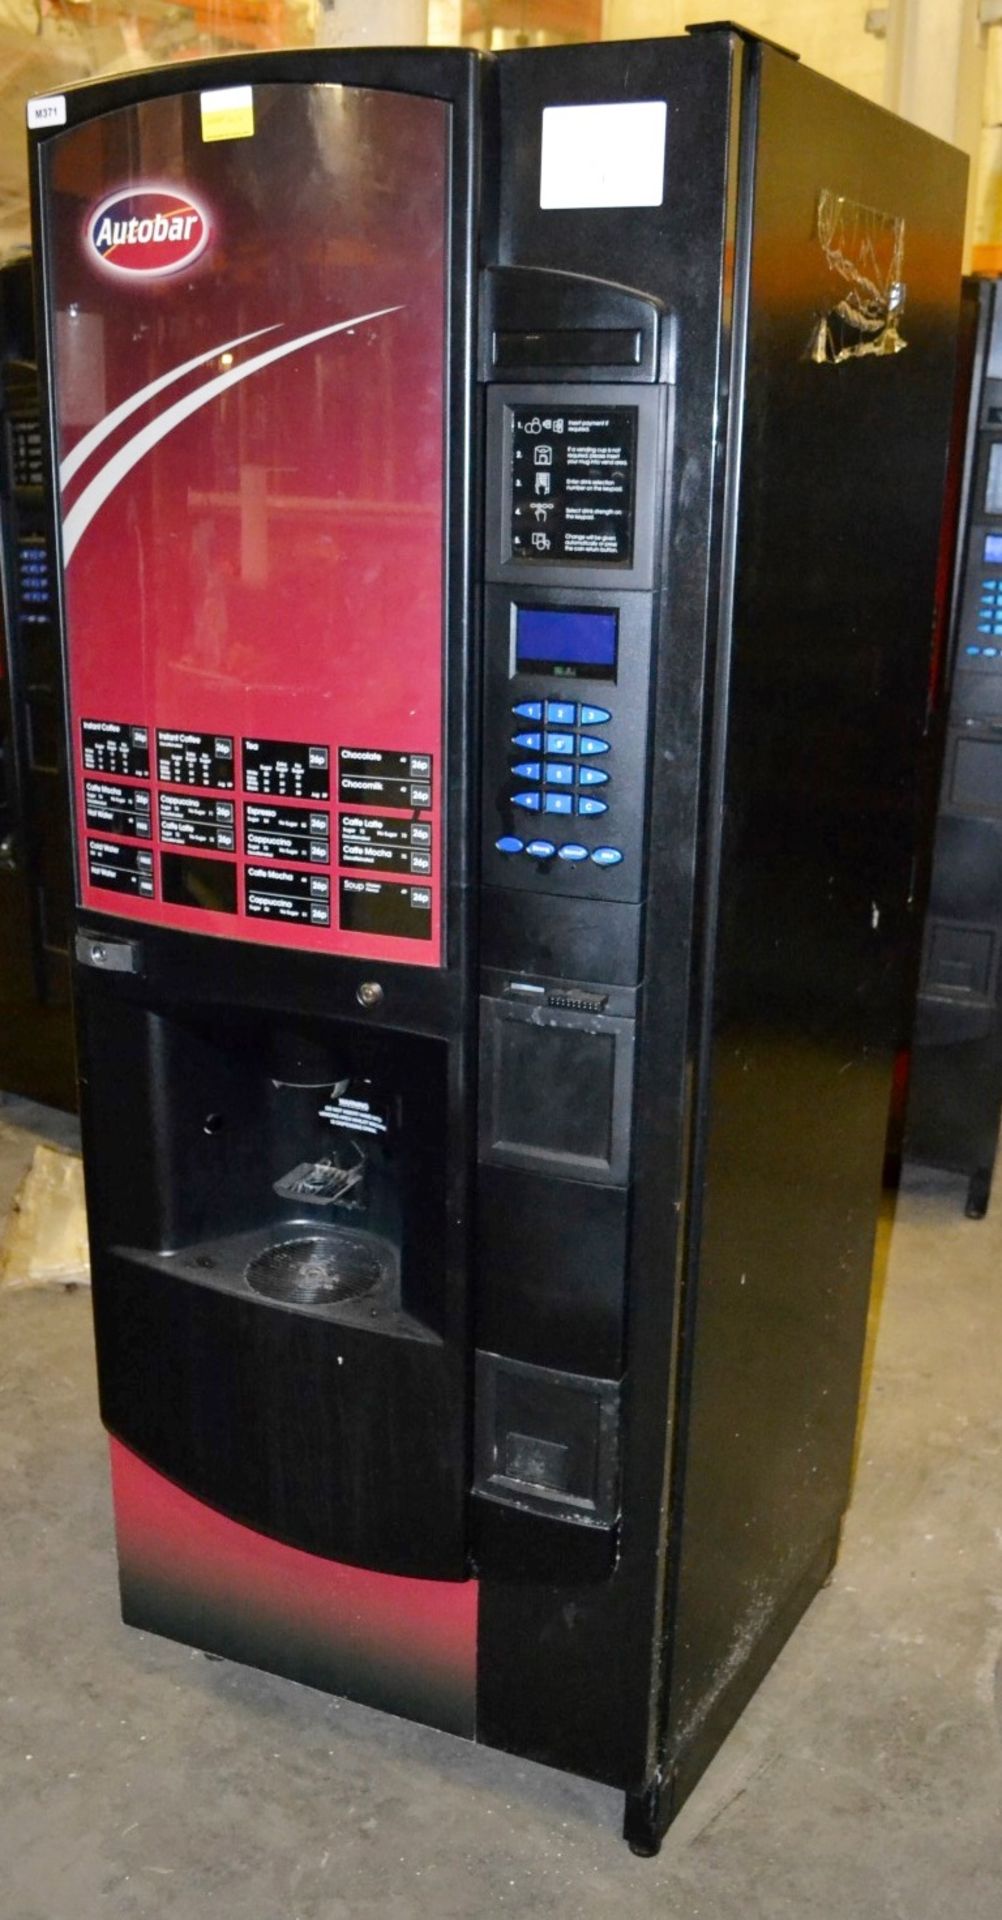 1 x Crane "Evolution" Hot Beverage Drinks Vending Machine - Year: 2009 - Recently Taken From A - Image 7 of 10